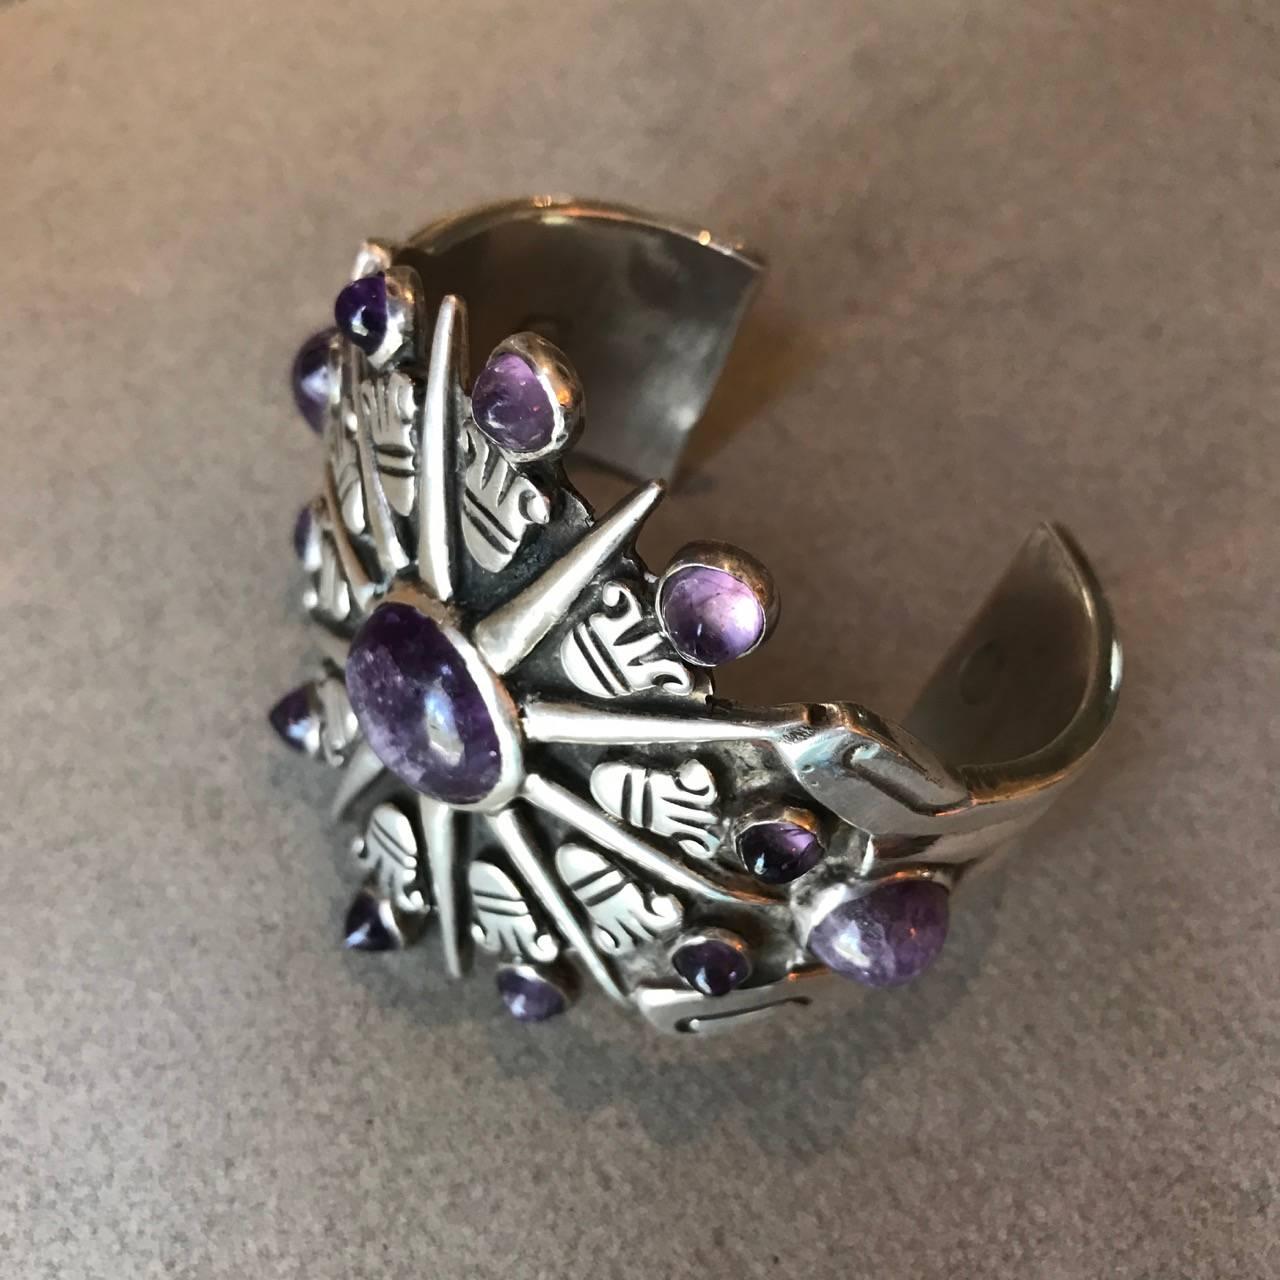 William Spratling Sterling Silver Aztec Sun Cuff with Amethyst

A superb piece by Taxco master William Spratling, this cuff bracelet is truly a work of art. It is solidly constructed with high relief of oxidized sterling silver with 13 bezel set